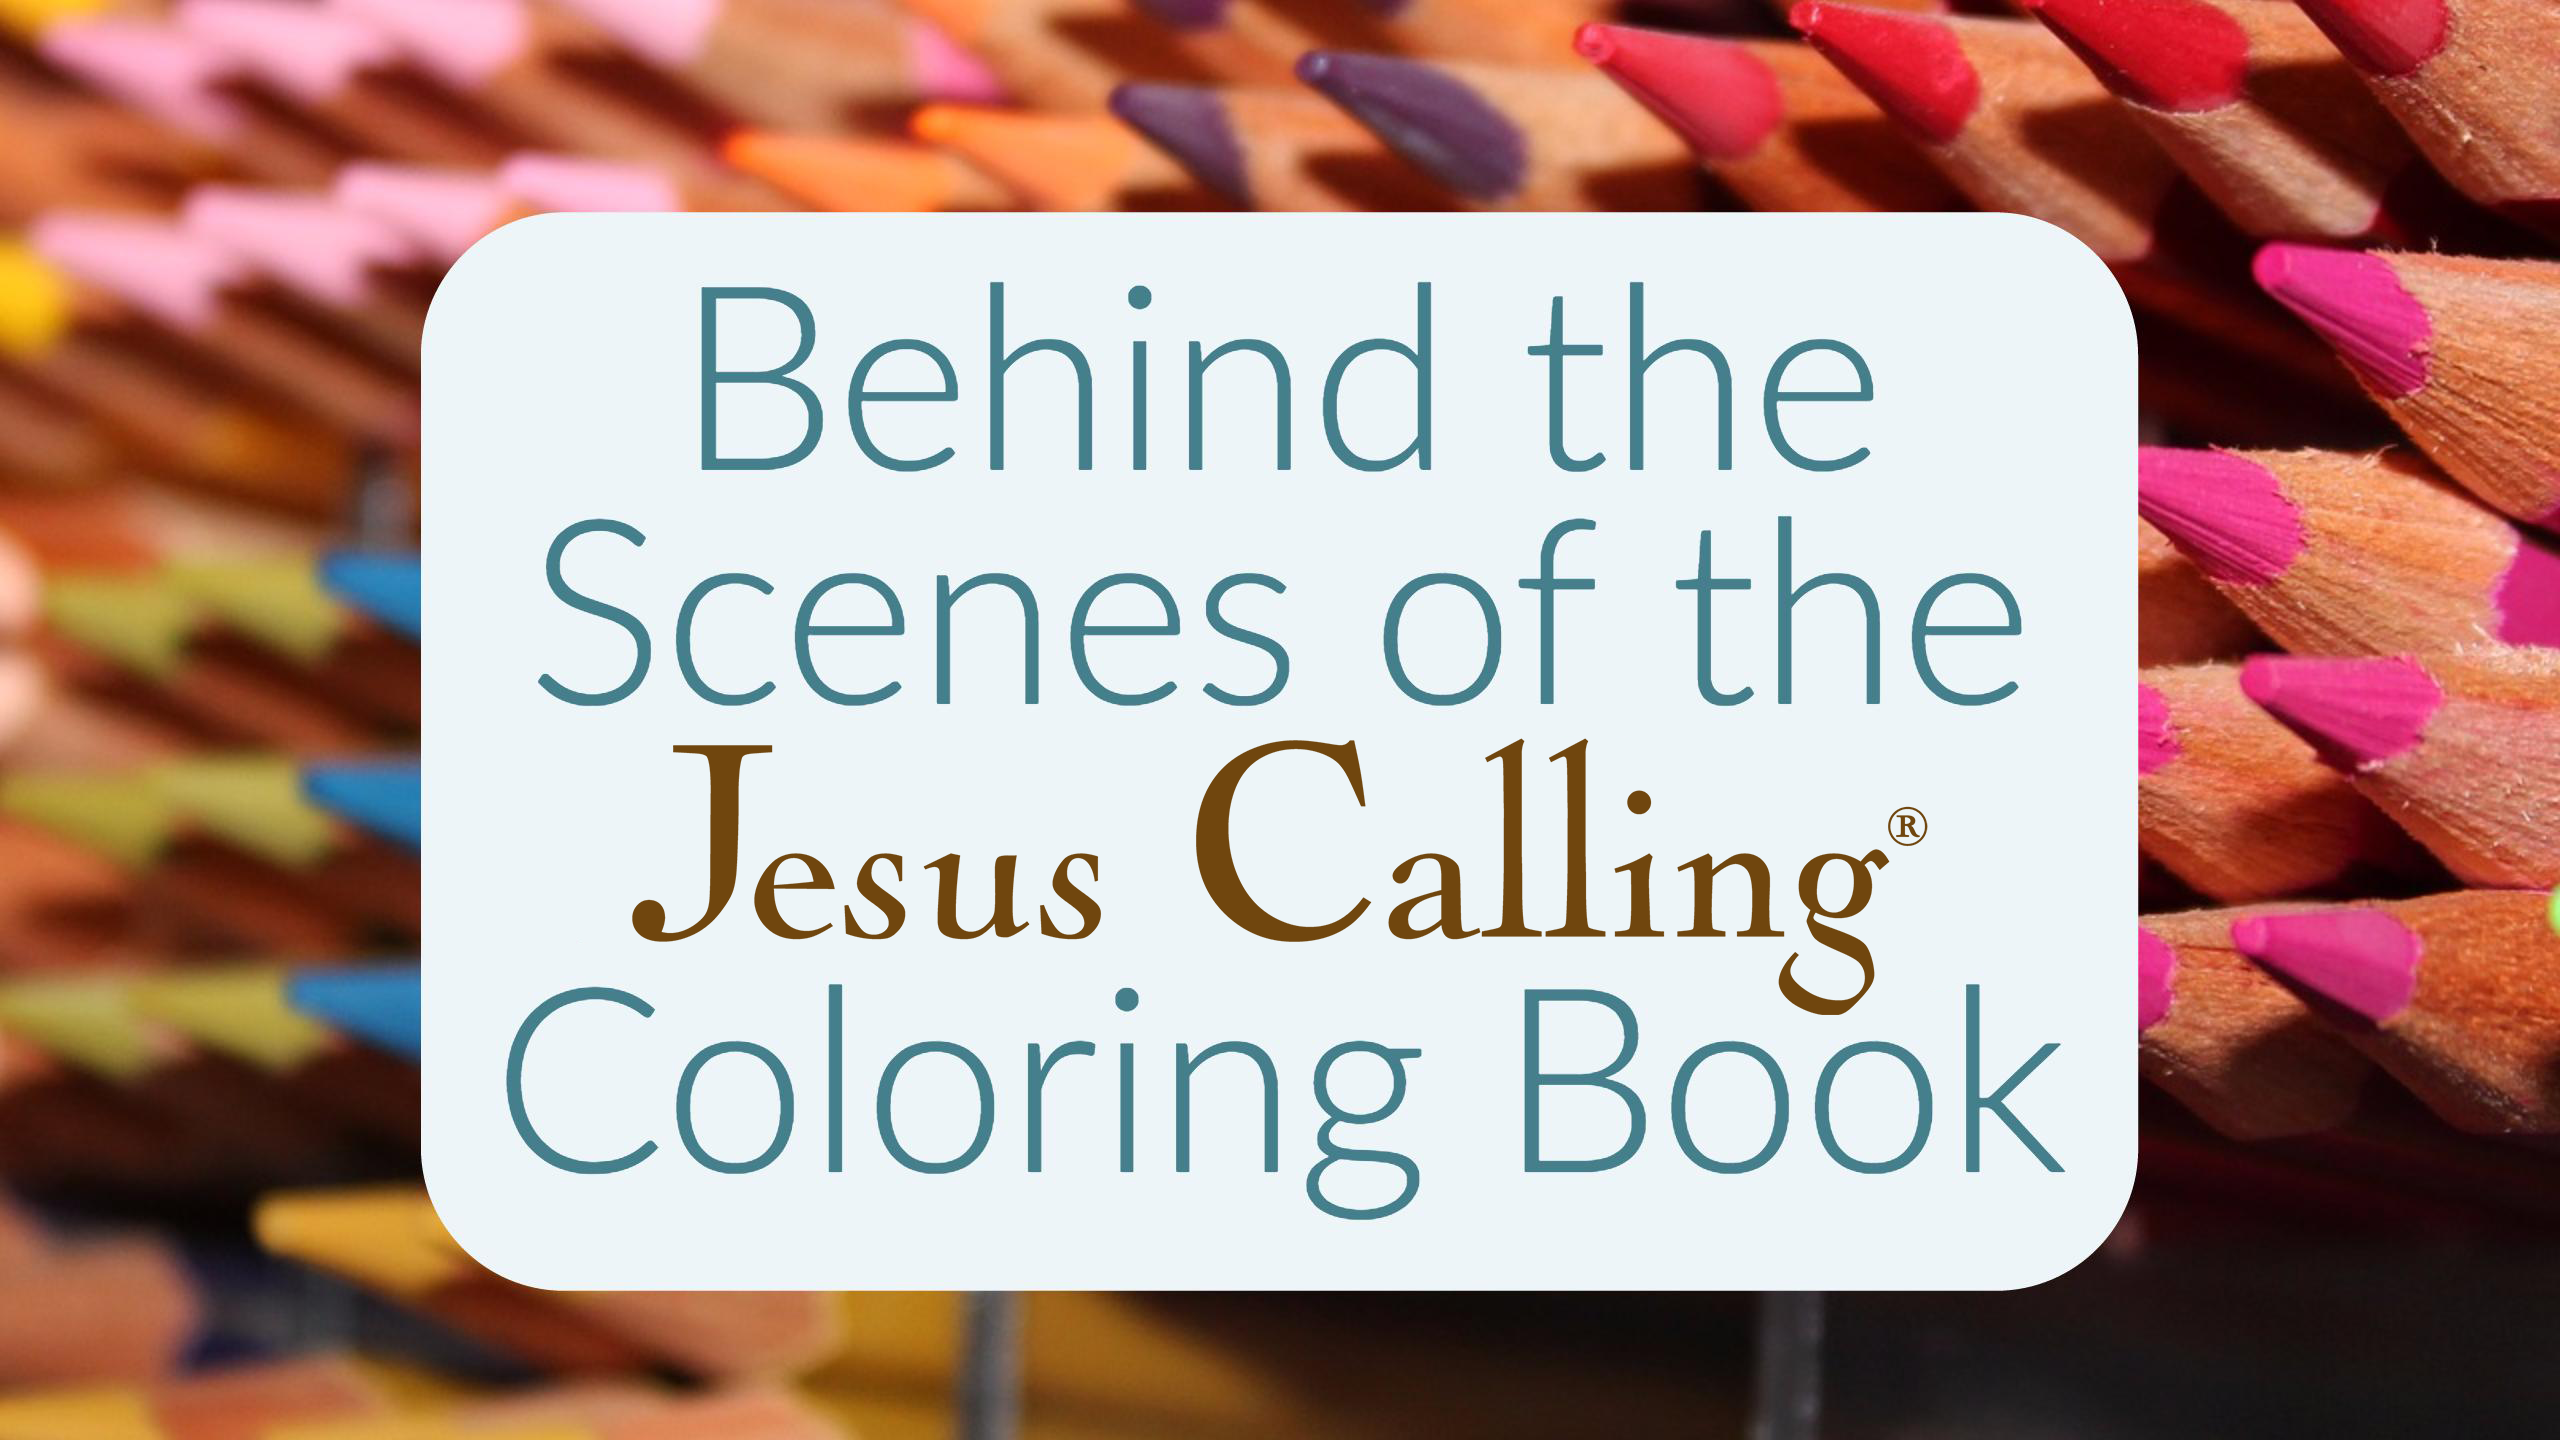 Behind the Scenes of the Jesus Calling Coloring Book.